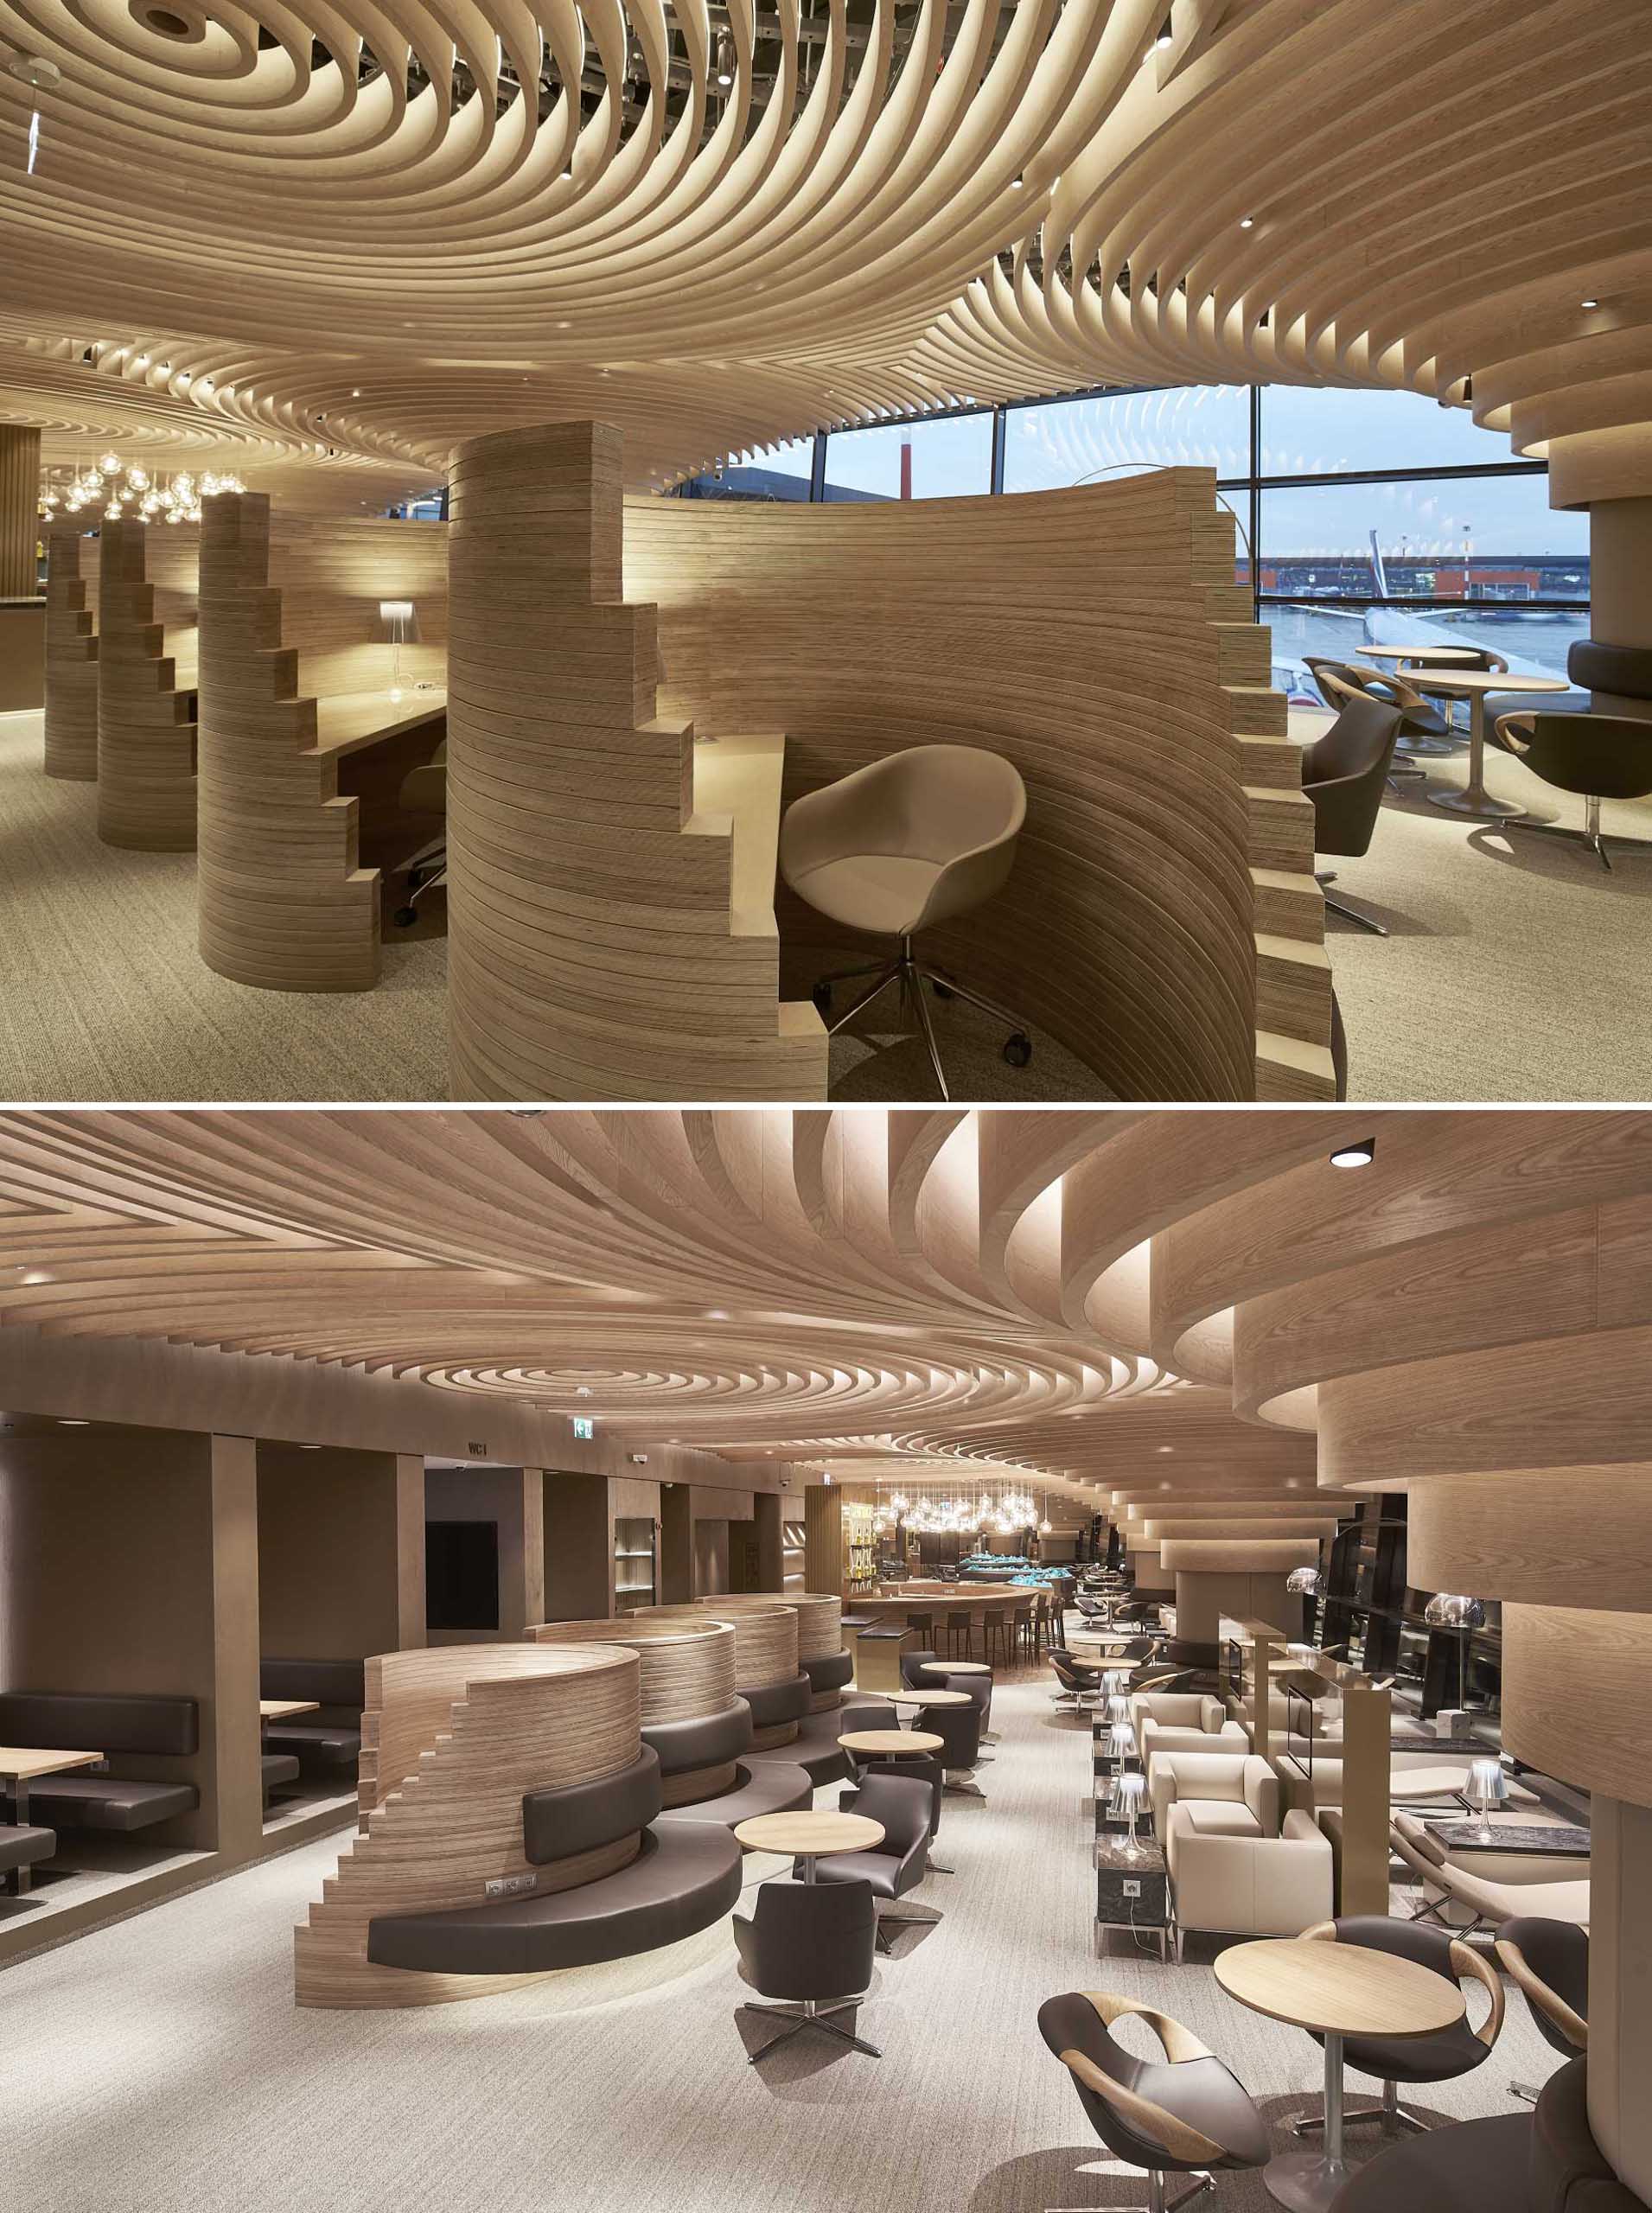 A sculptural wood ceiling spreads over various seating areas of this airport lounge.